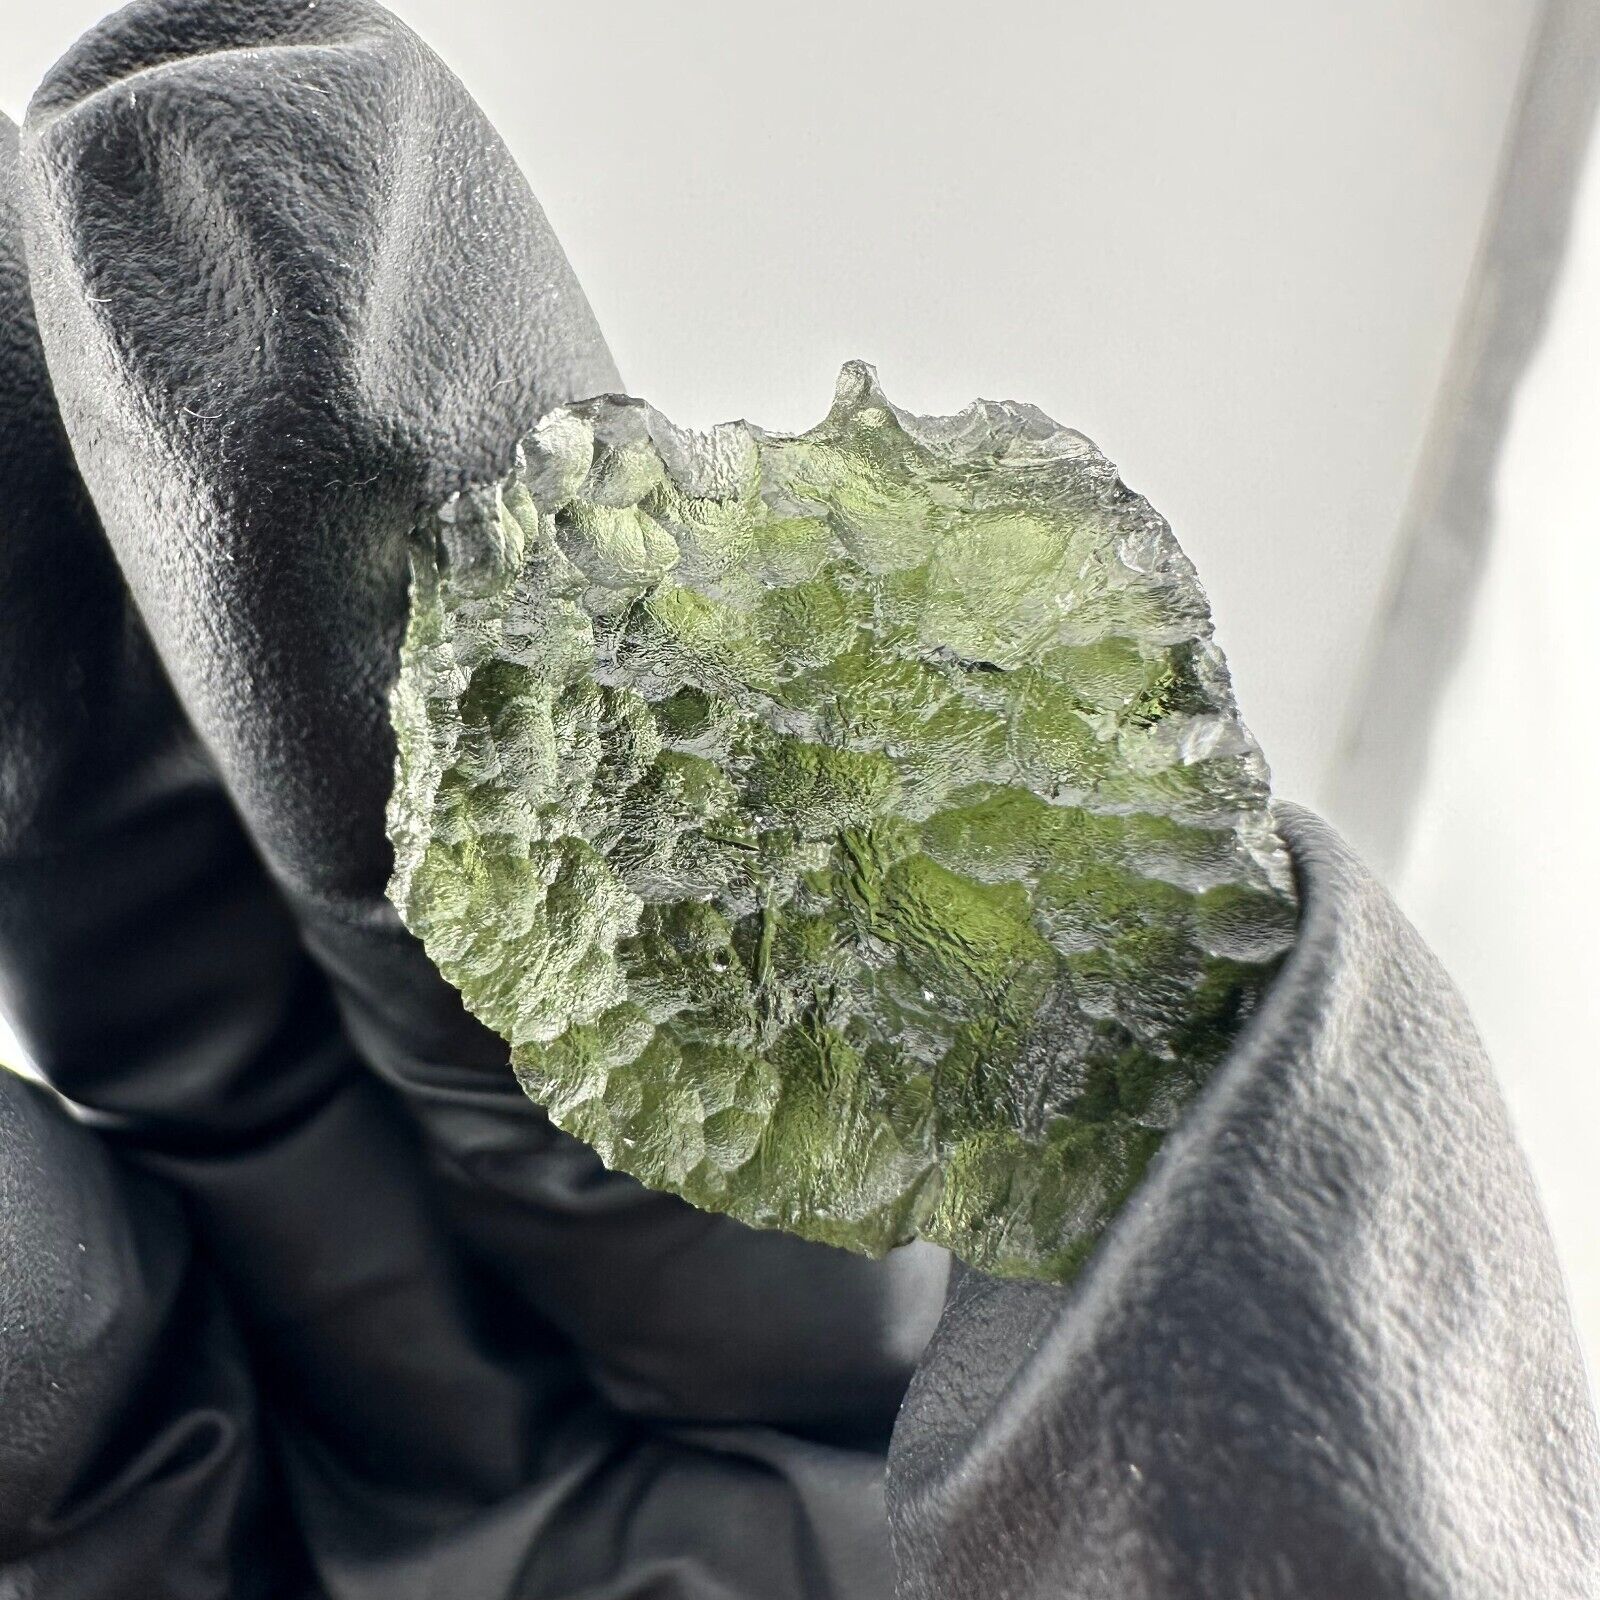 8.4g Museum Quality Moldavite from Czech Republic (CoA) Collect with Confidence